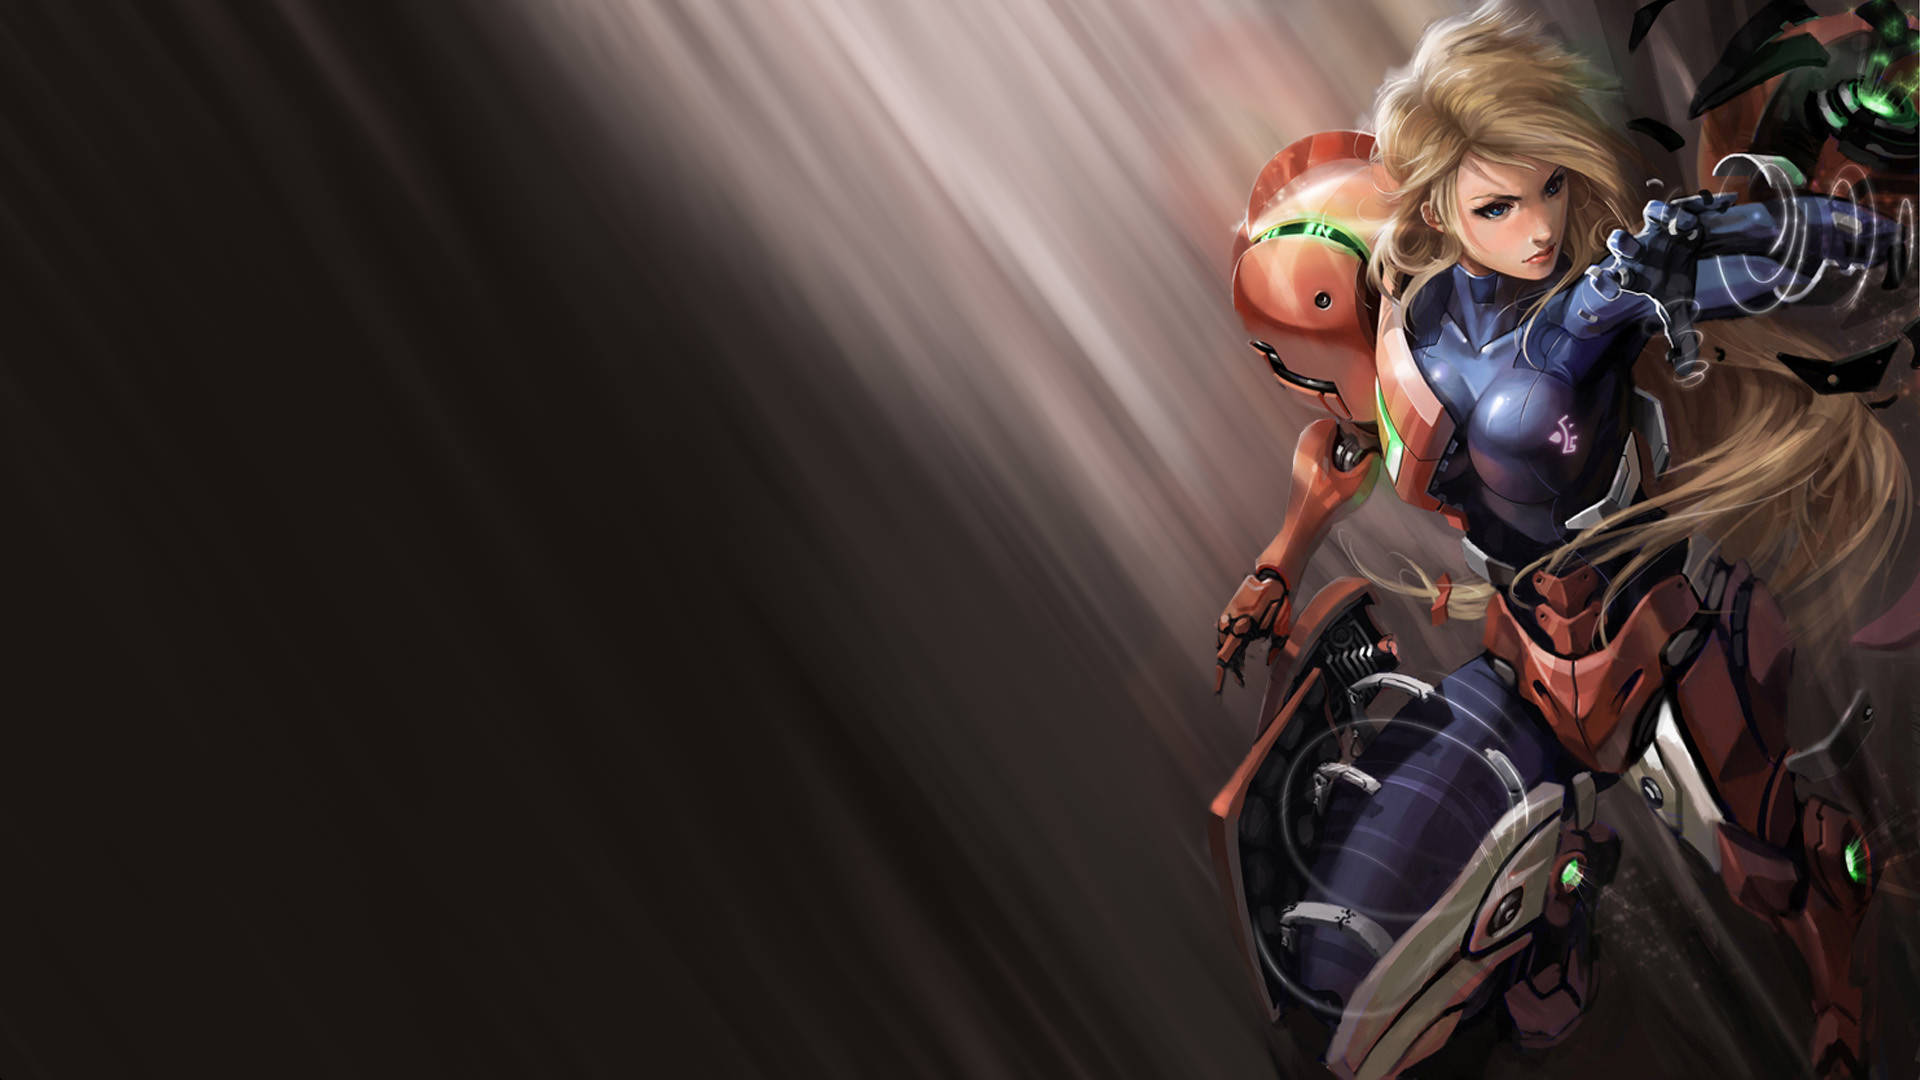 1920X1080 Metroid Wallpaper and Background